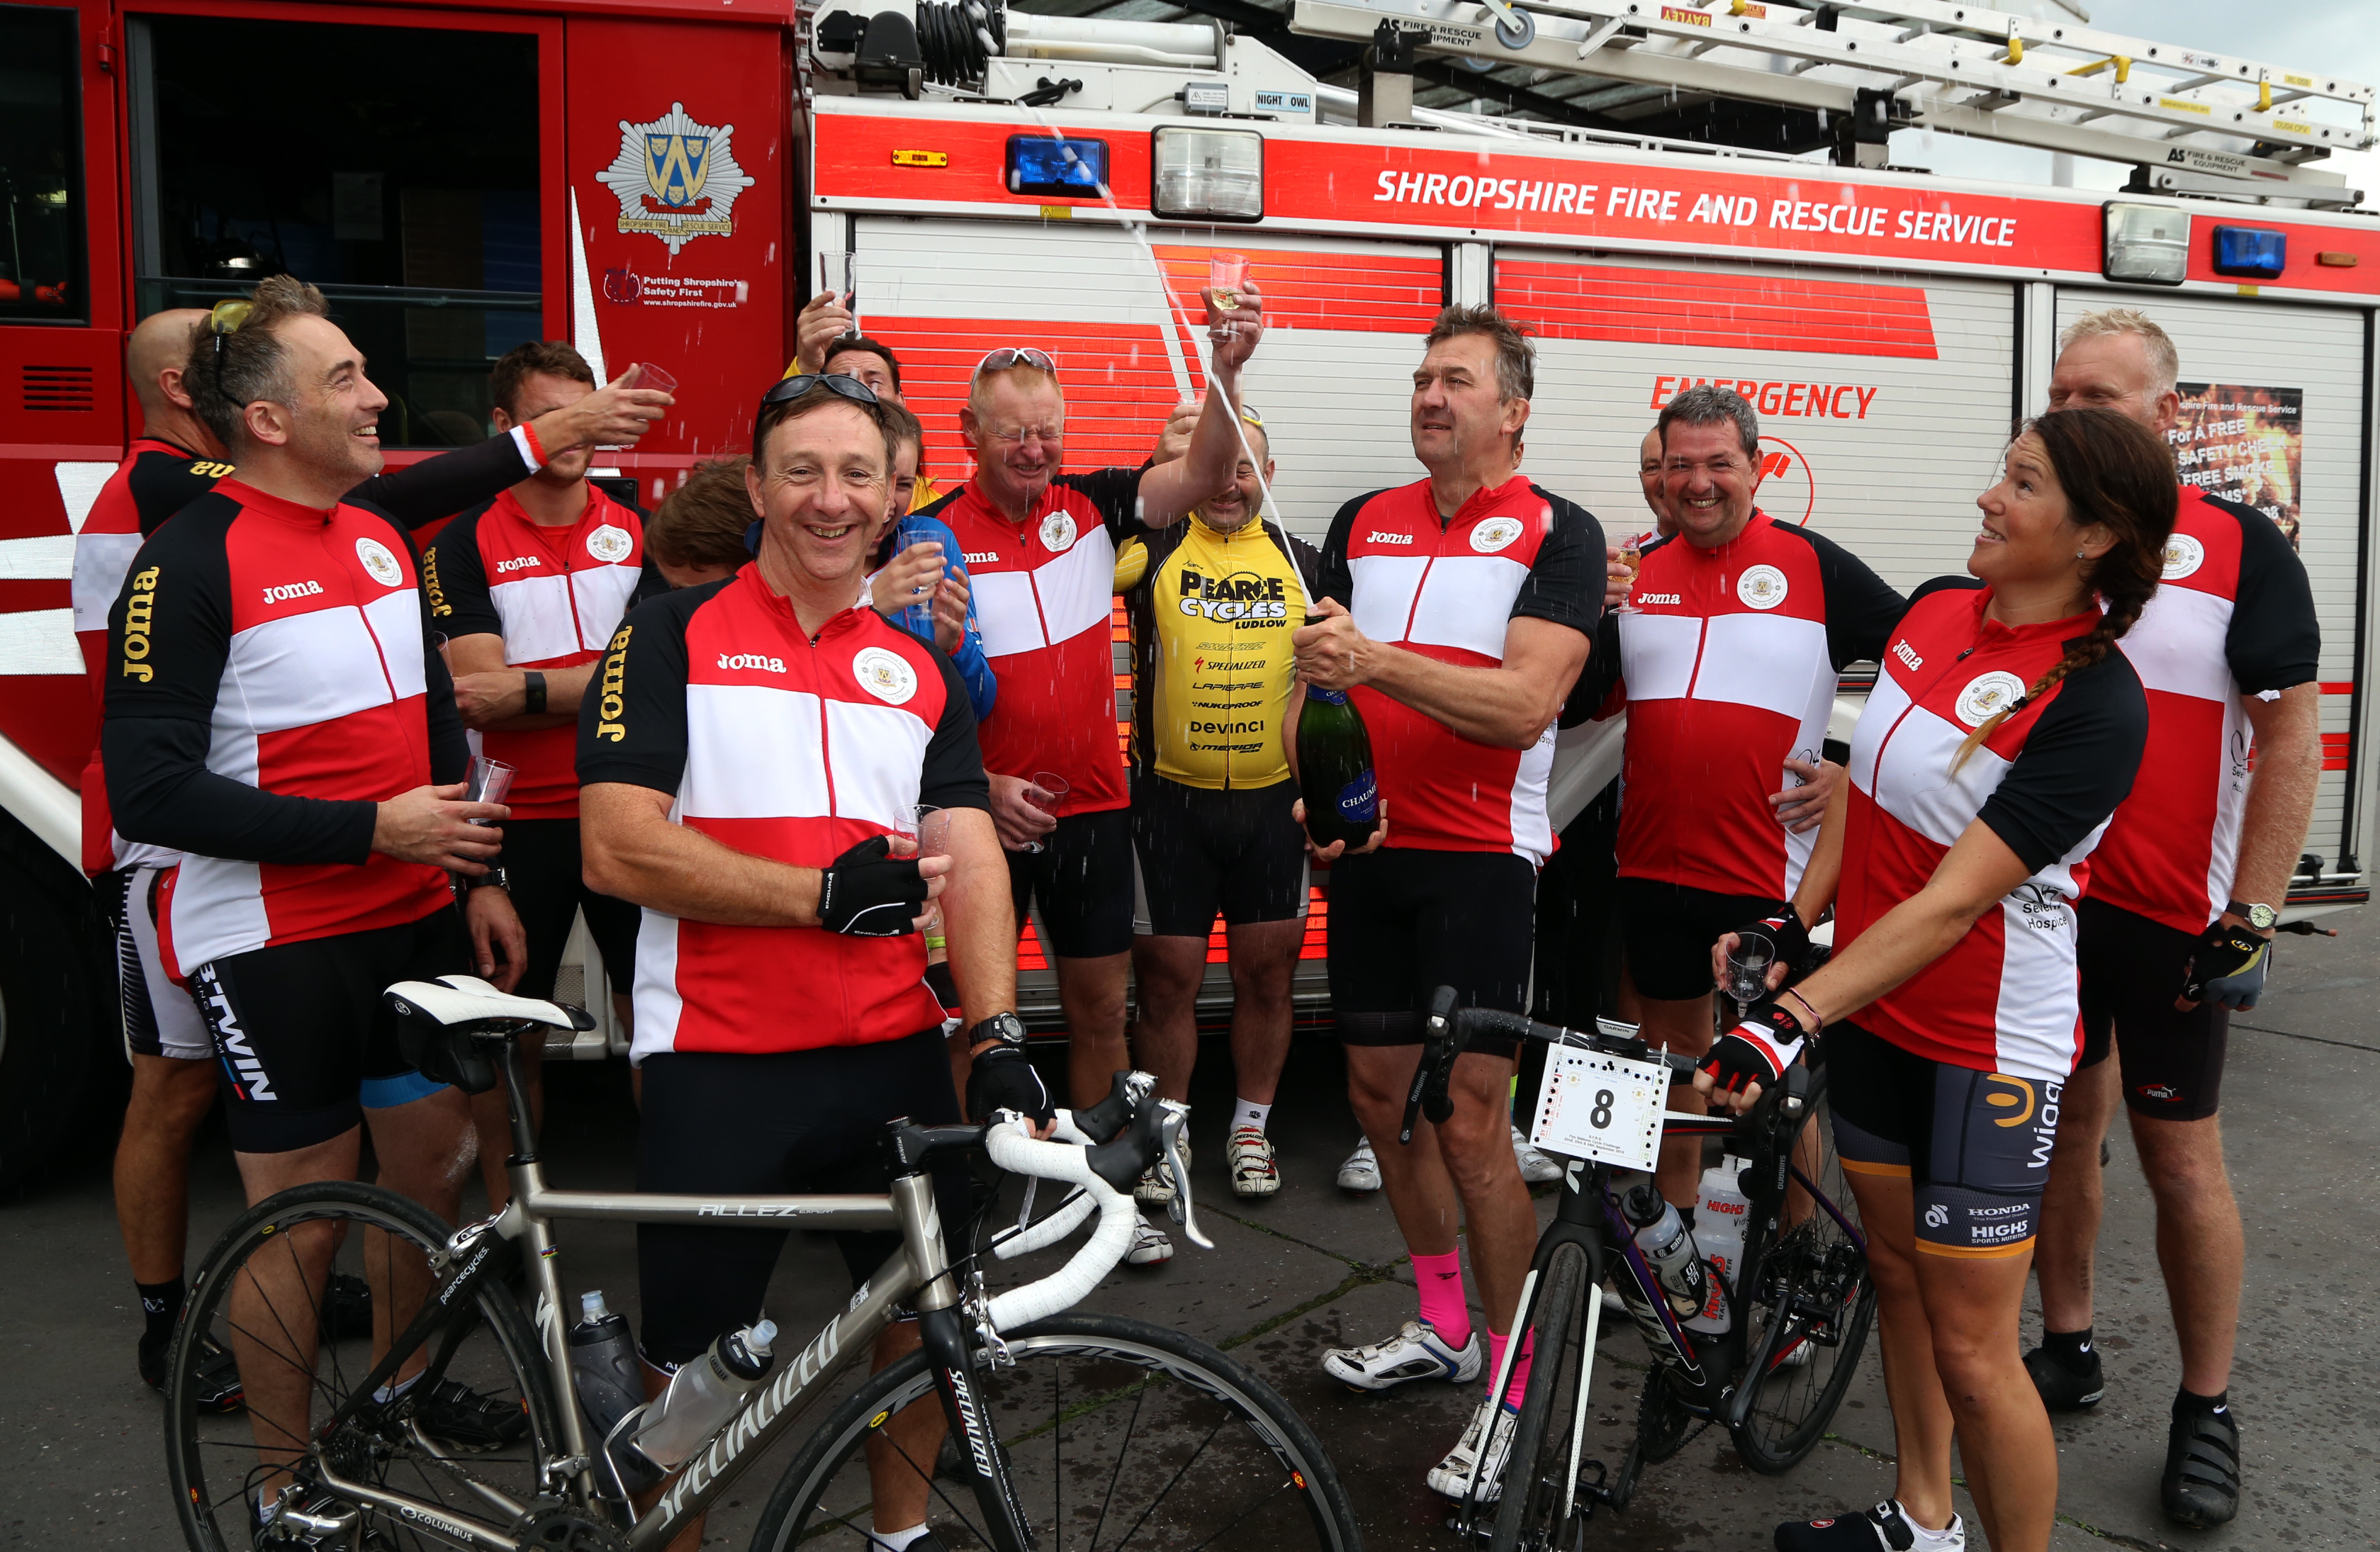 Champagne corks popped at the end of a marathon three day charity cycle ride in aid of The Severn Hospice and the Fire Fighters Charity by members of Shropshire Fire and Rescue Service.